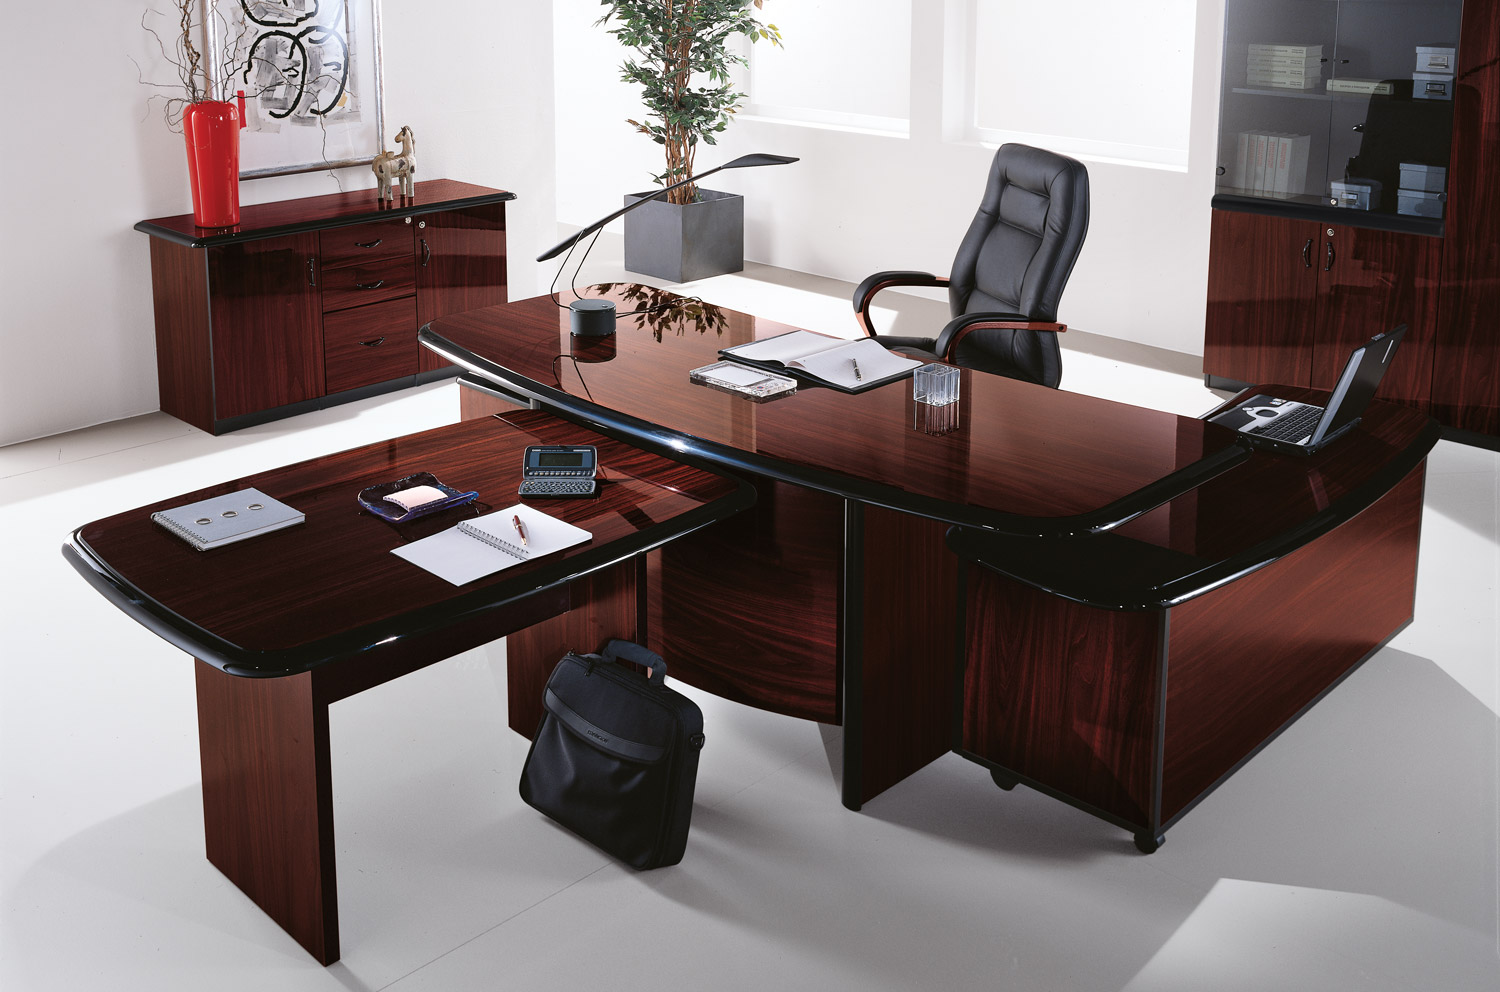 The Long-Term Investment: Choosing Durable and Quality Office Furniture